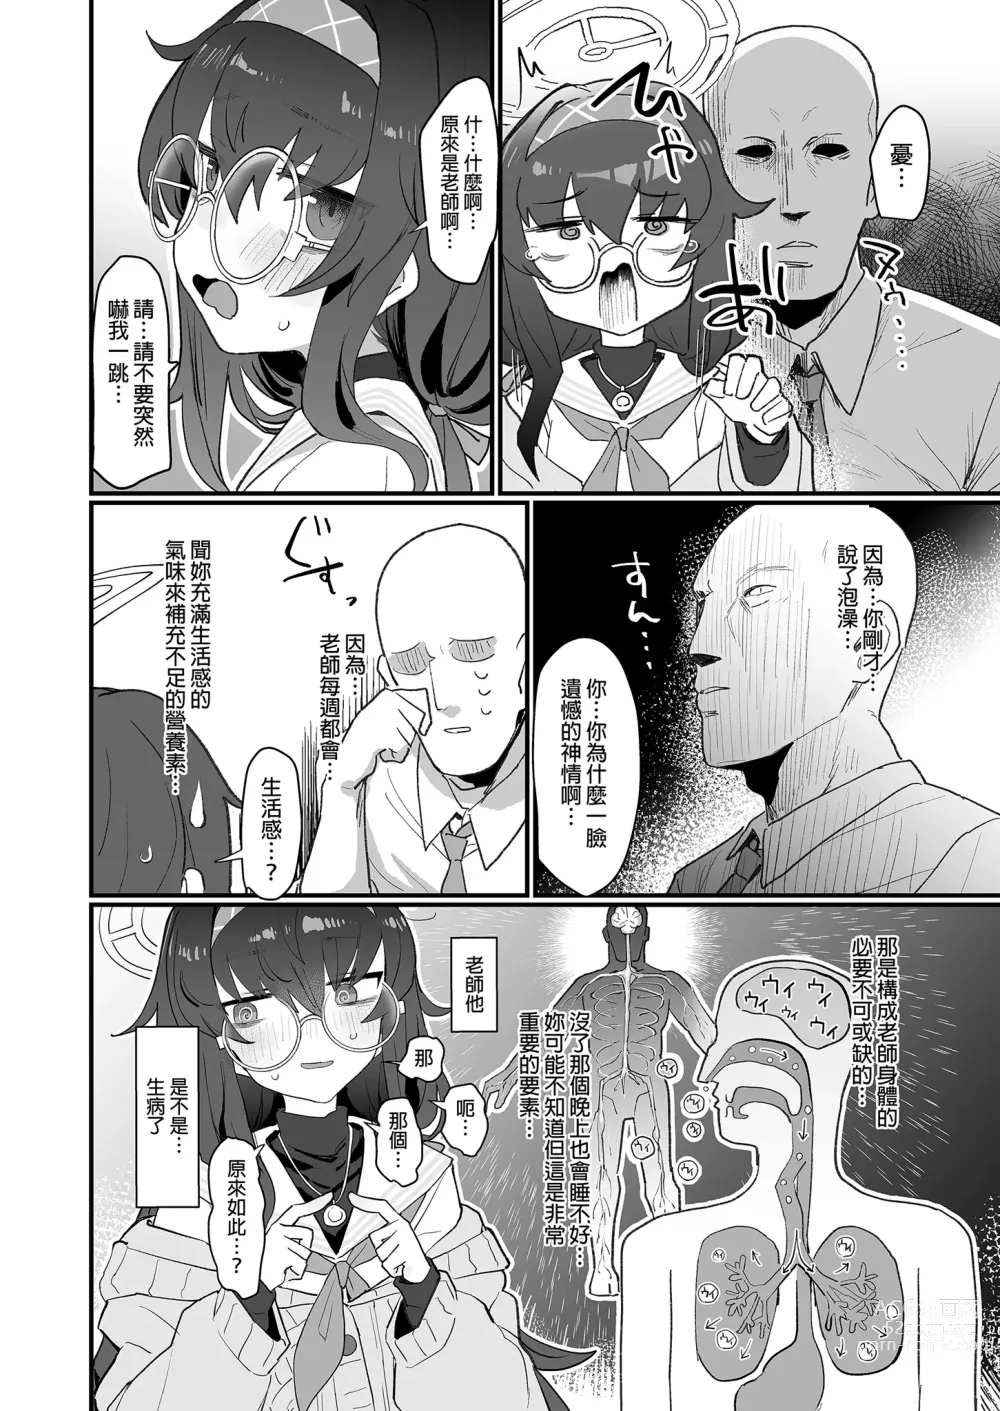 Page 4 of doujinshi 古書館願望清單 (decensored)